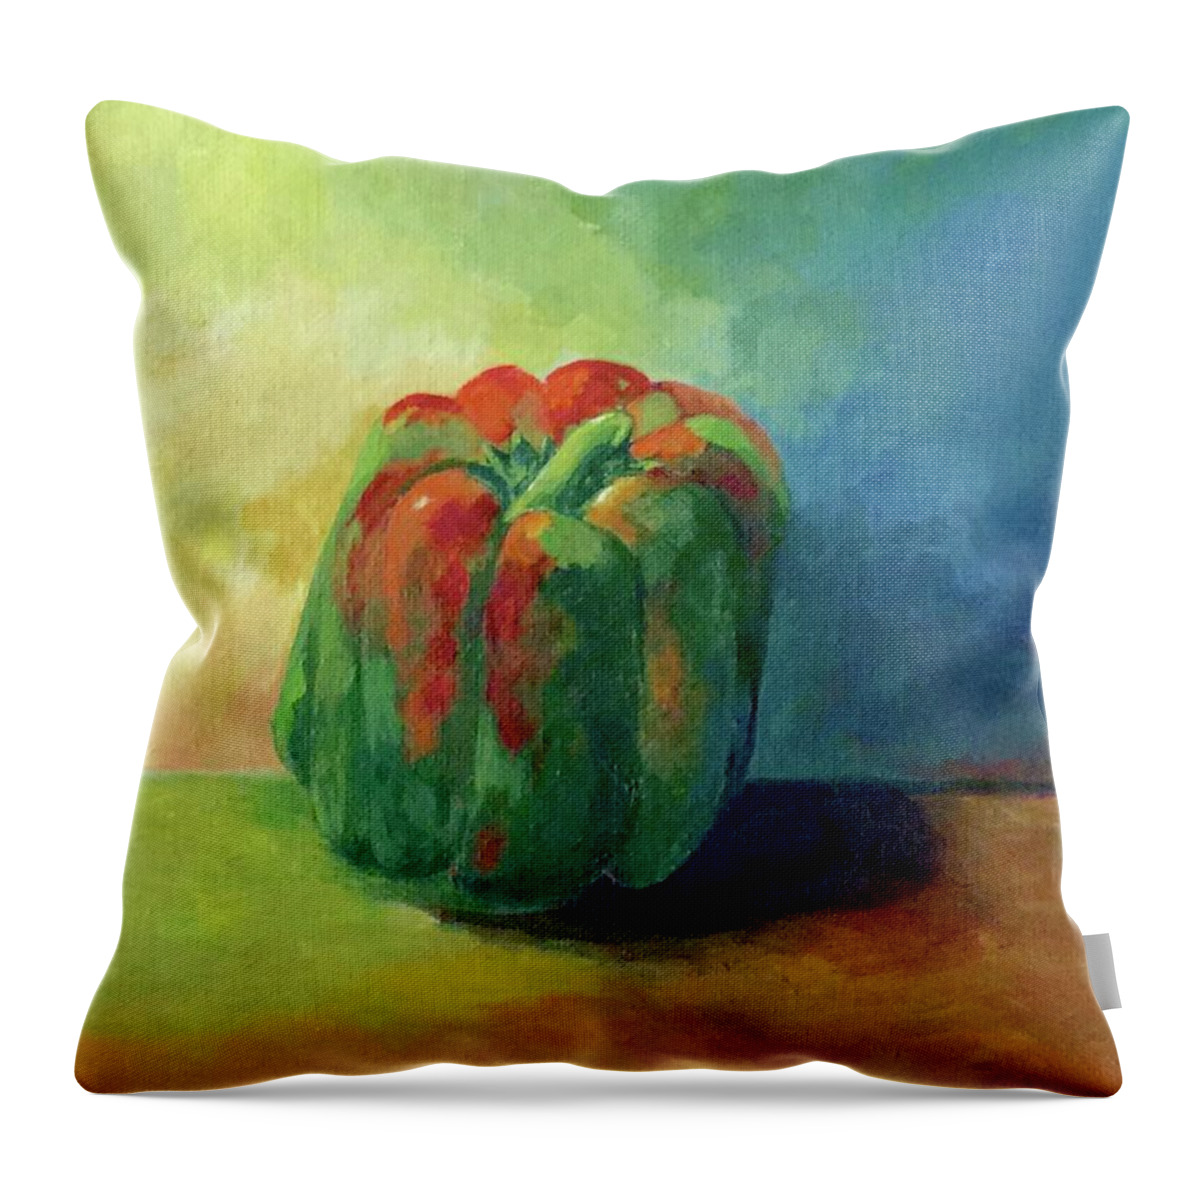 Bell Pepper Throw Pillow featuring the painting Bella Pepper by Jane Ricker